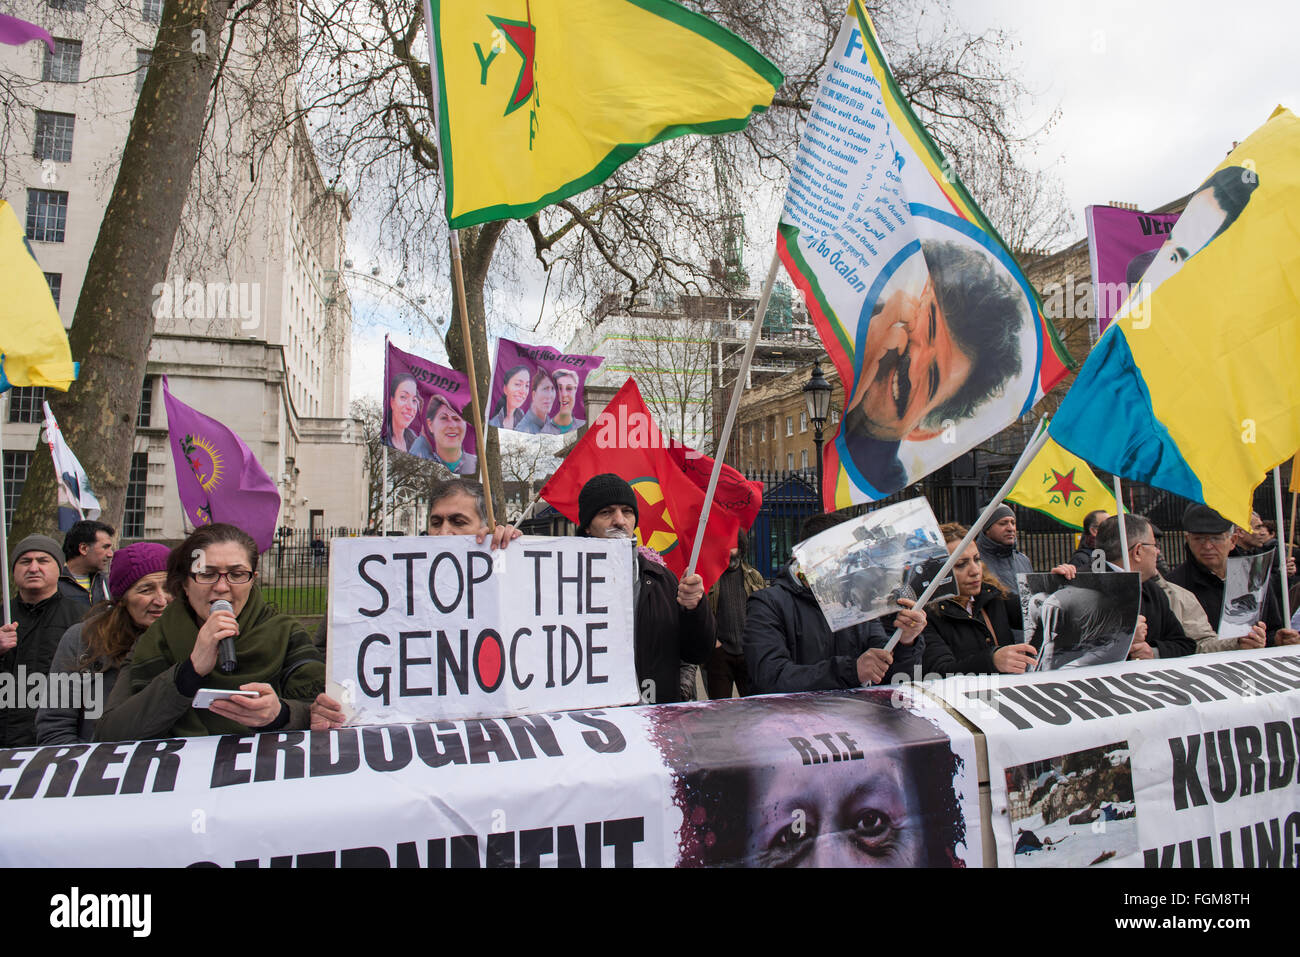 Kurdish people protest outside the Downing Street, London, UK. 10th February, 2016.  Placard: 'Stop The Genocide' Stock Photo